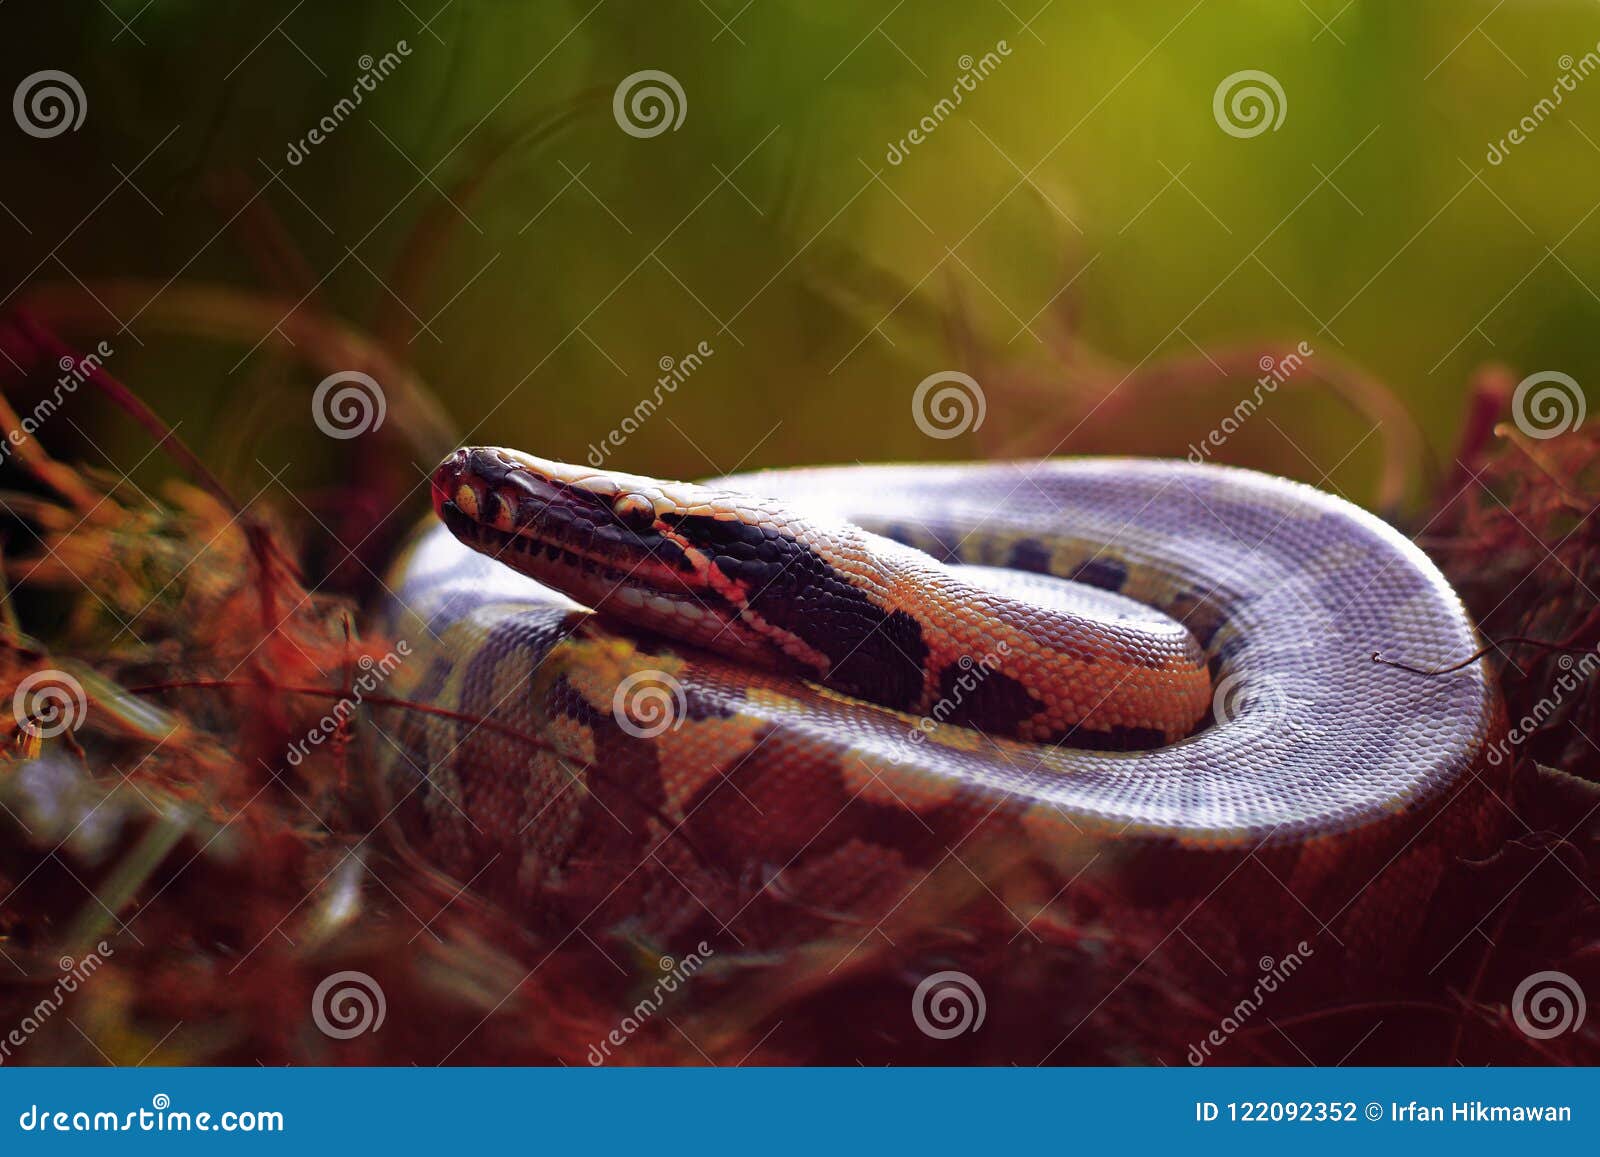 https://thumbs.dreamstime.com/z/snakes-snake-long-legged-reptile-have-scales-like-lizards-equally-classified-scaly-reptiles-squamata-122092352.jpg